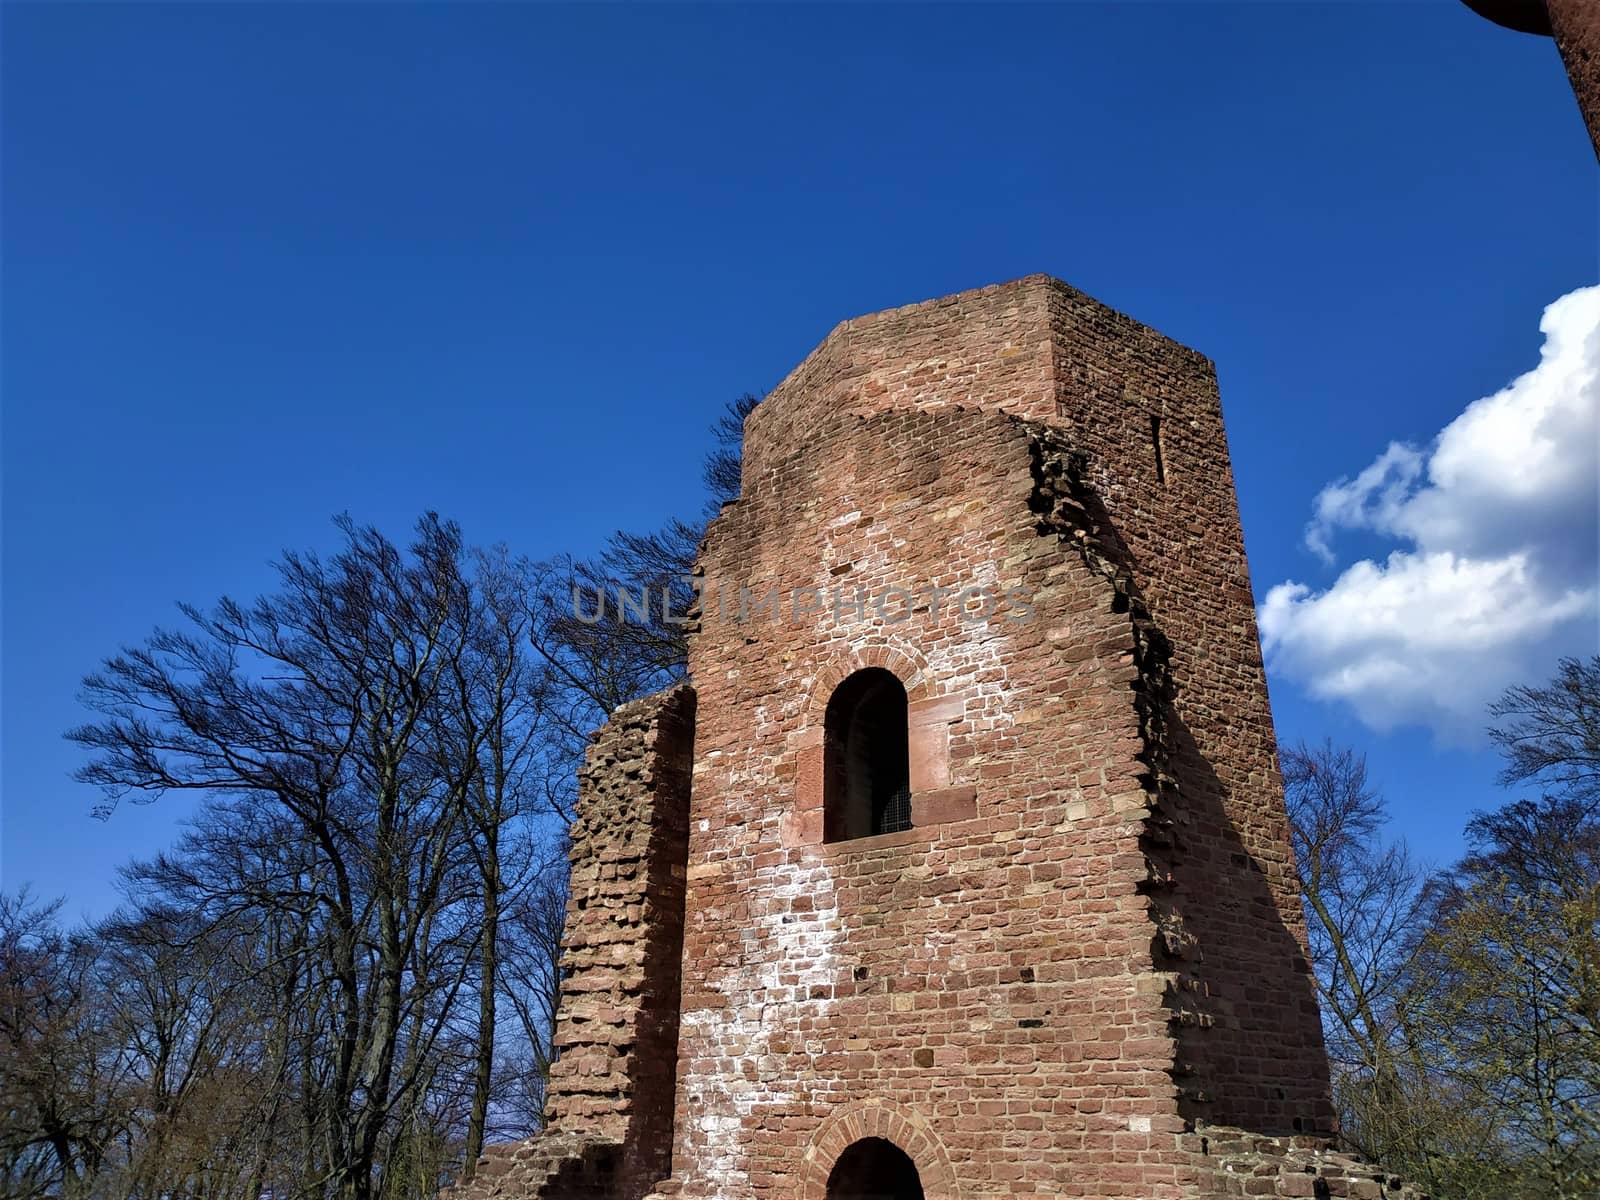 Tower of old monastery on the Heiligenberg in Heidelberg by pisces2386